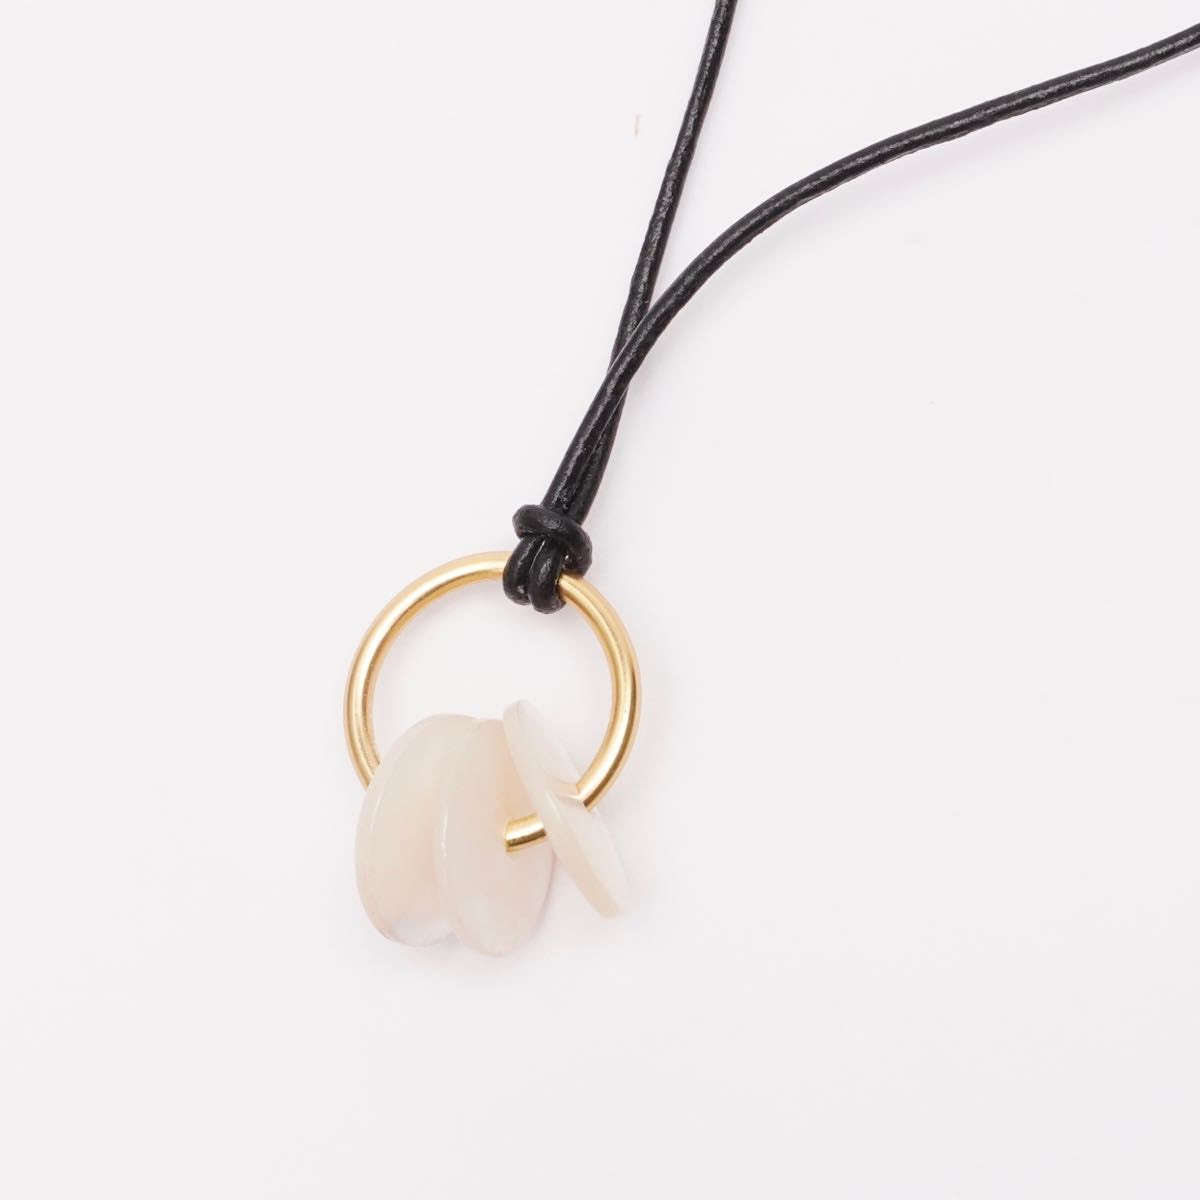 【WOMEN】J.CREW MOTHER OF PEARL PENDANT NECKLACE